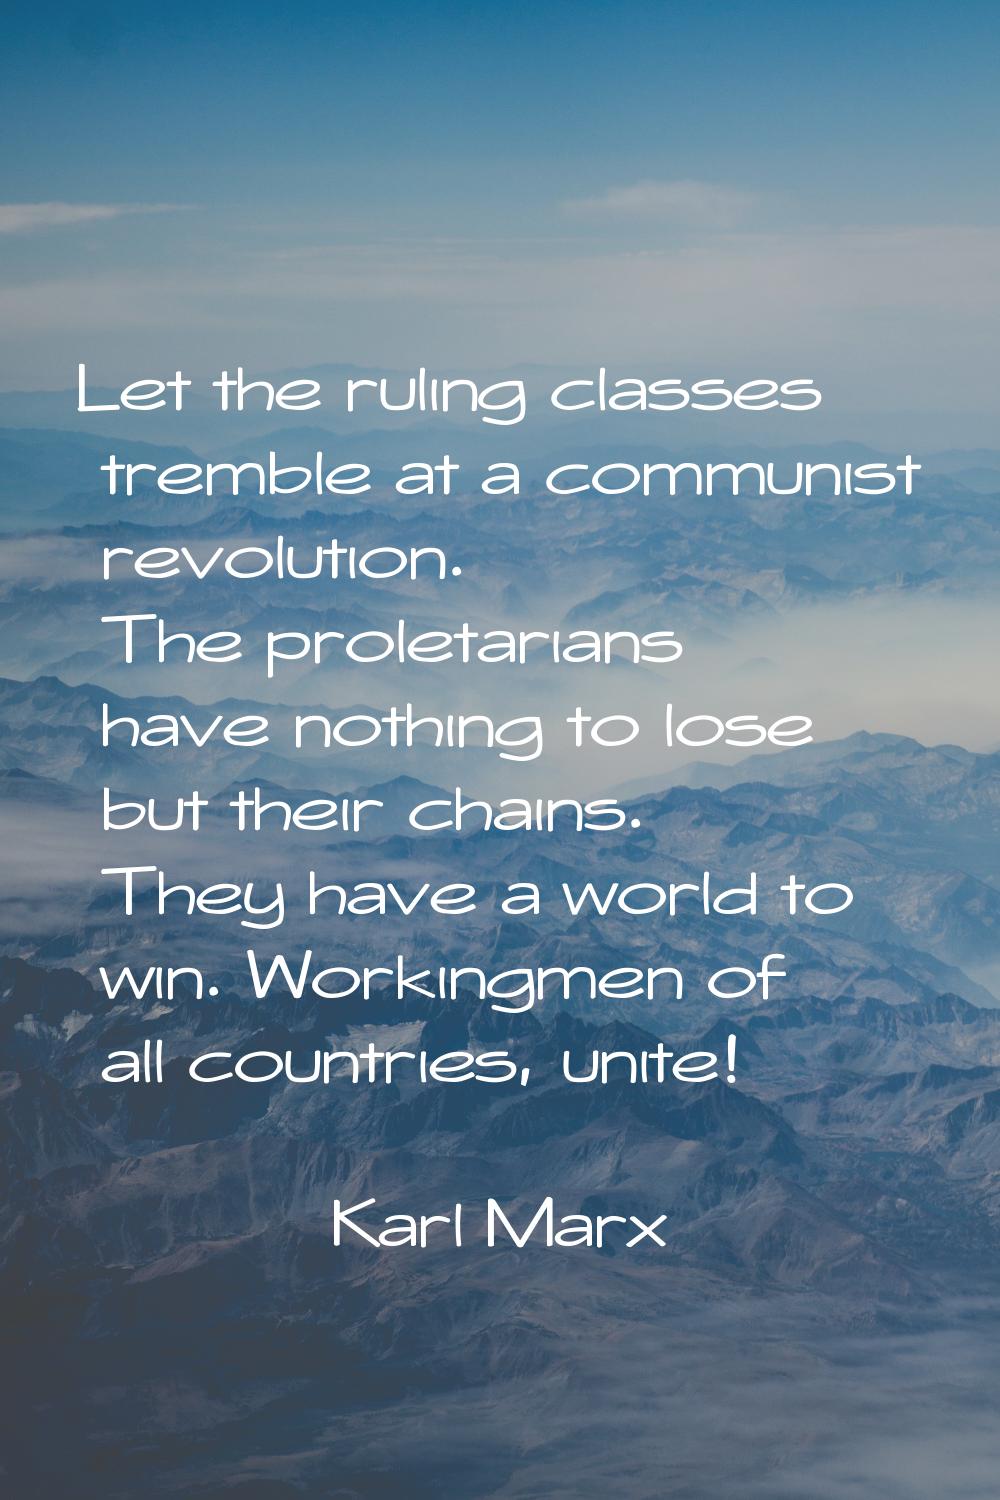 Let the ruling classes tremble at a communist revolution. The proletarians have nothing to lose but